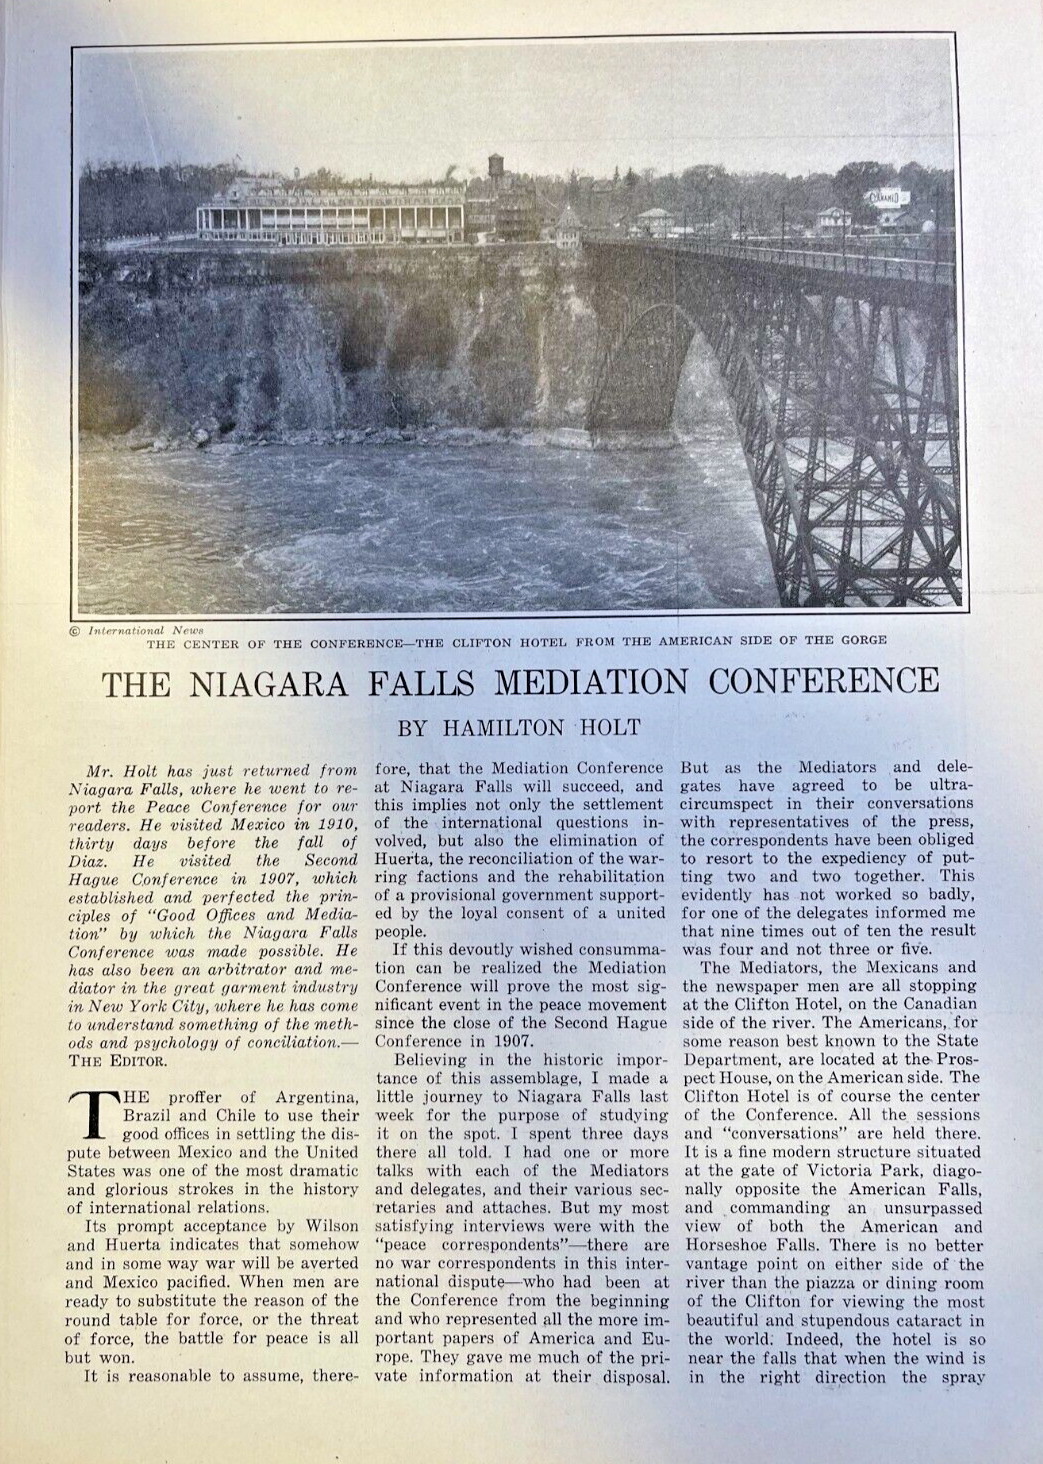 1914 Niagra Falls Mediation Conference Dispute Between Mexico & Unites States